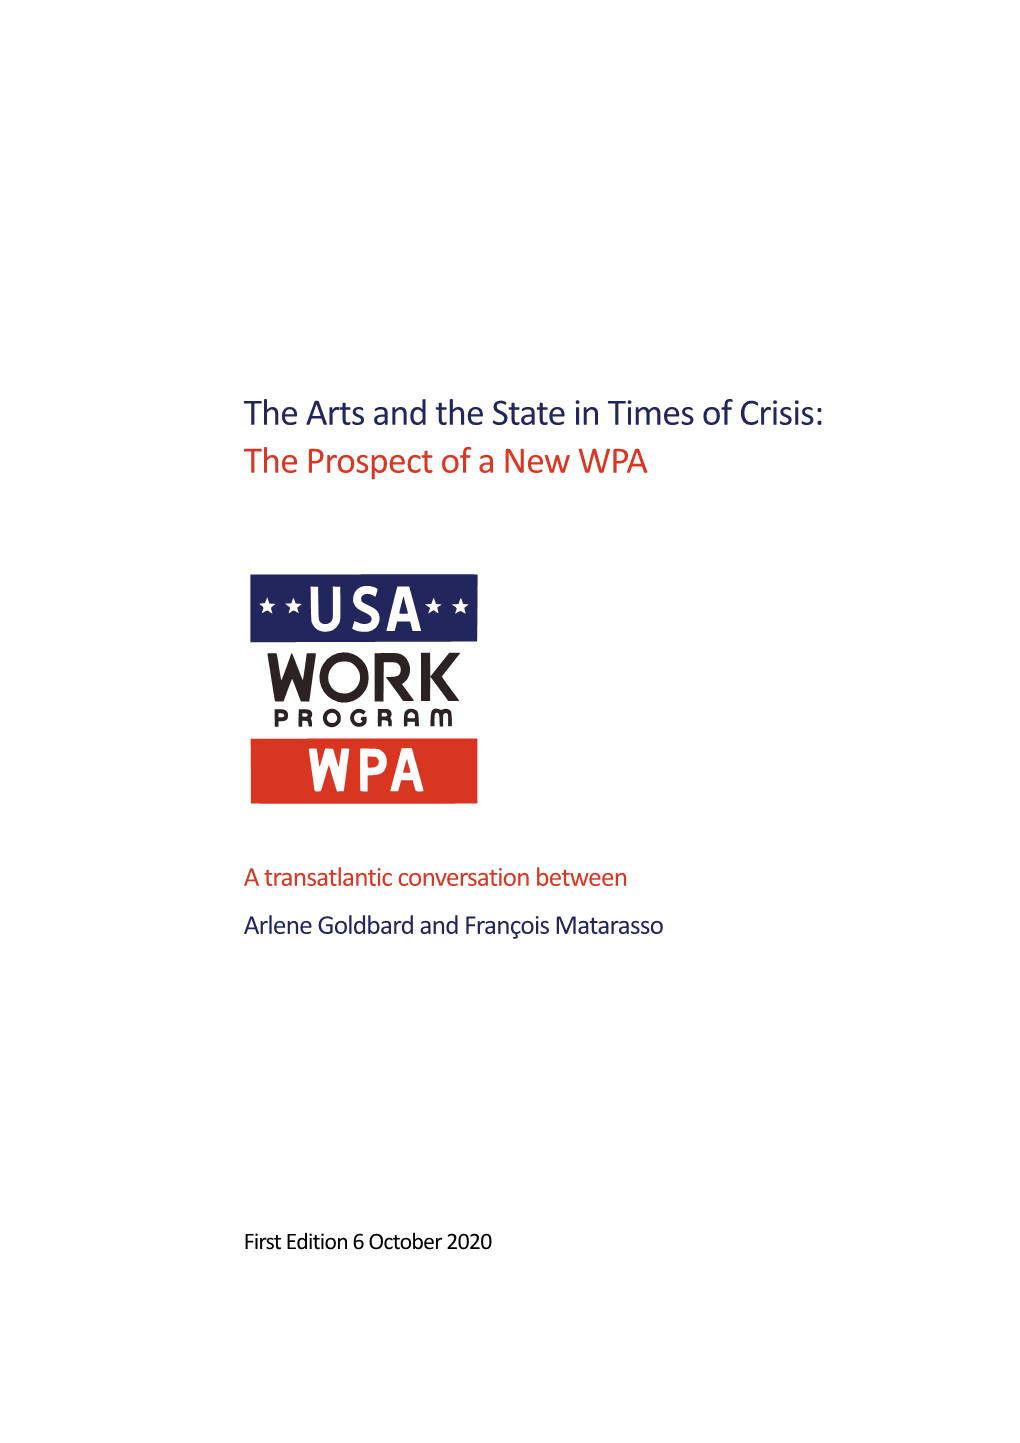 The Arts and the State in Times of Crisis: the Prospect of a New WPA